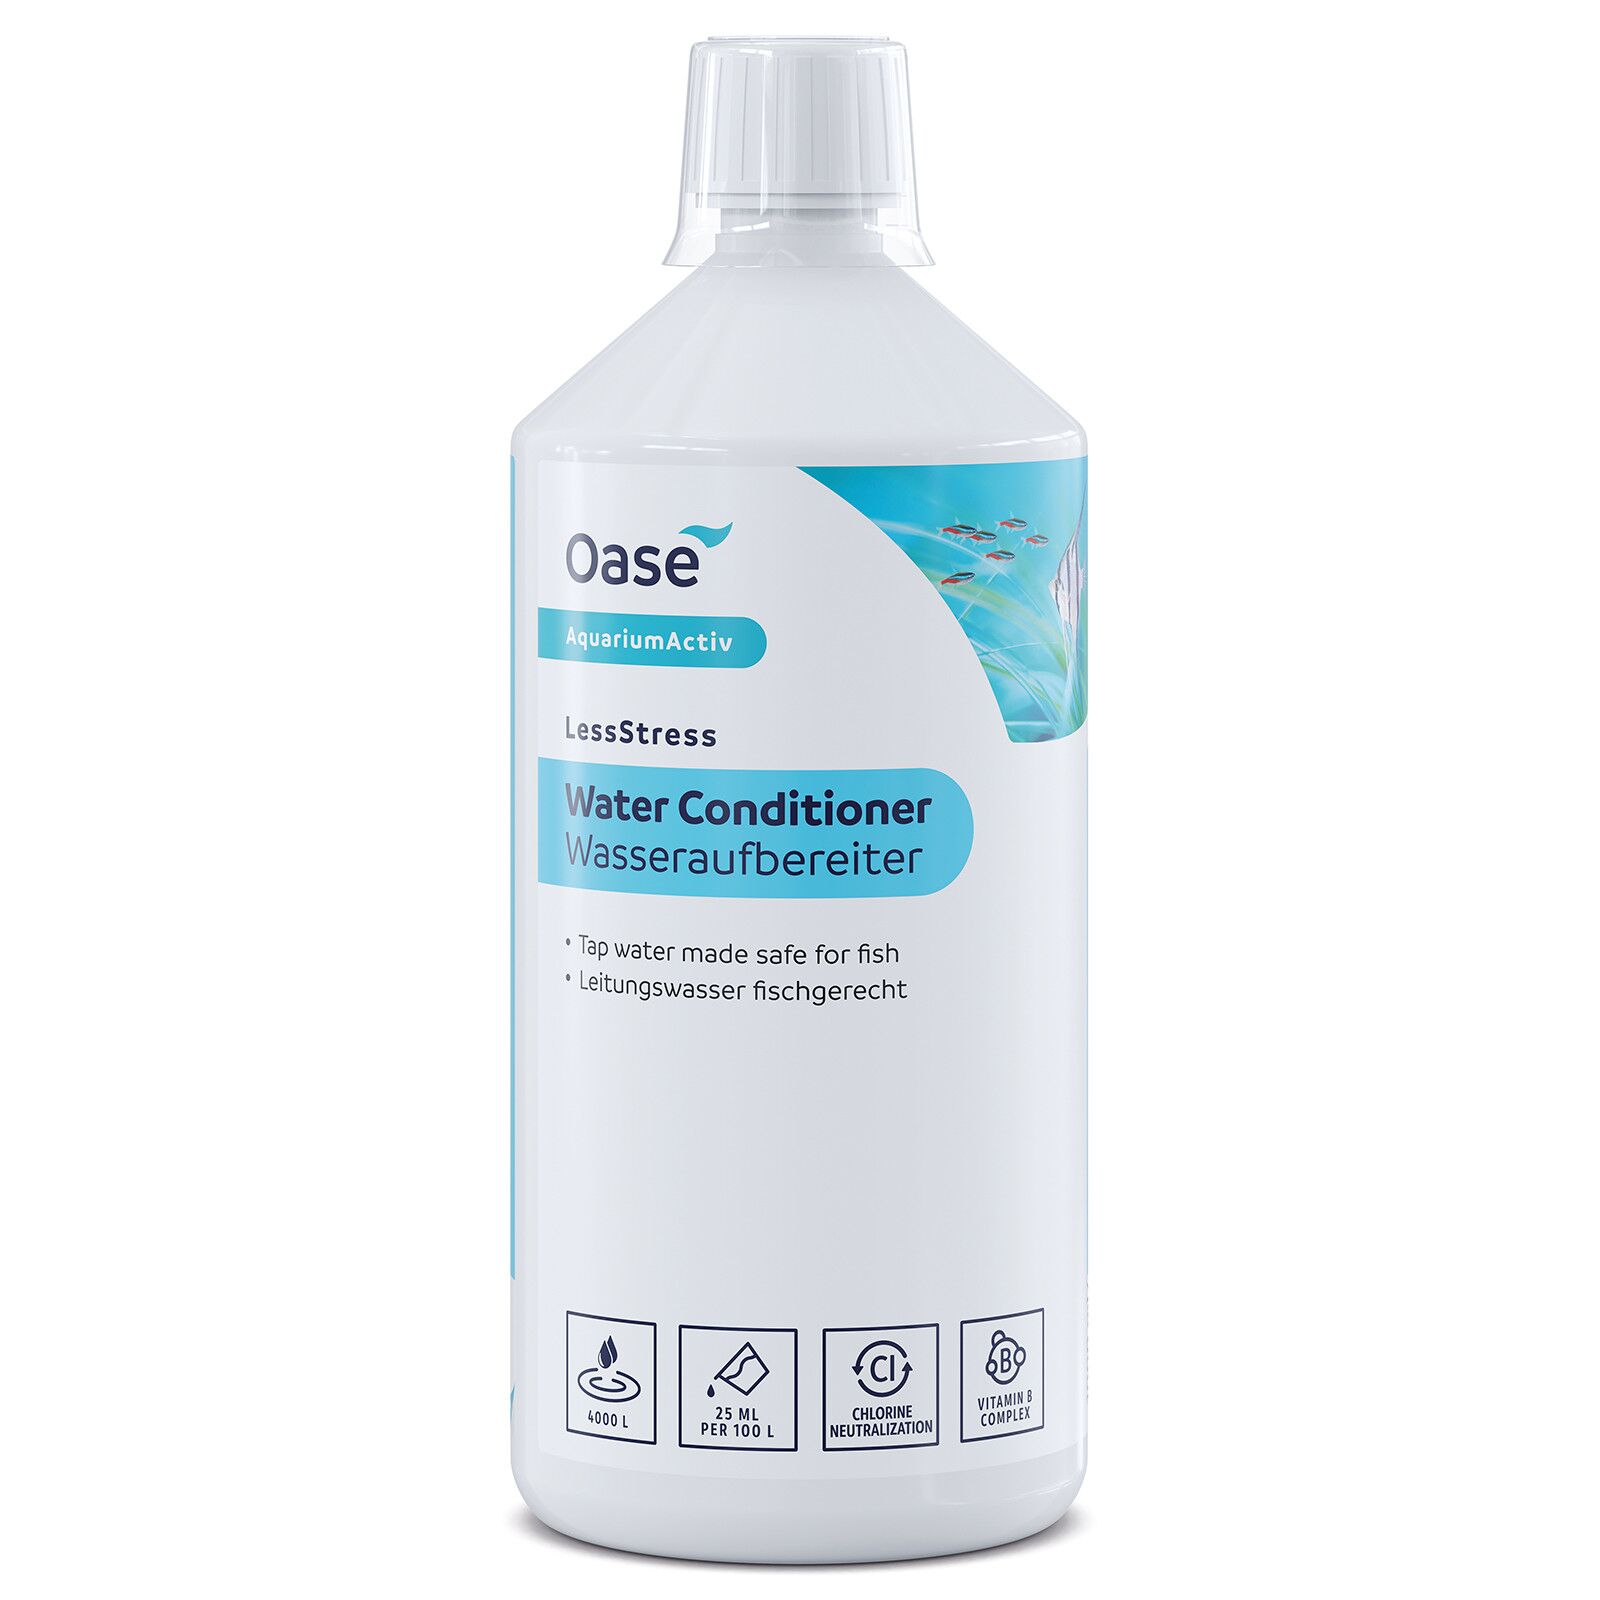 Oase - LessStress Water Conditioner